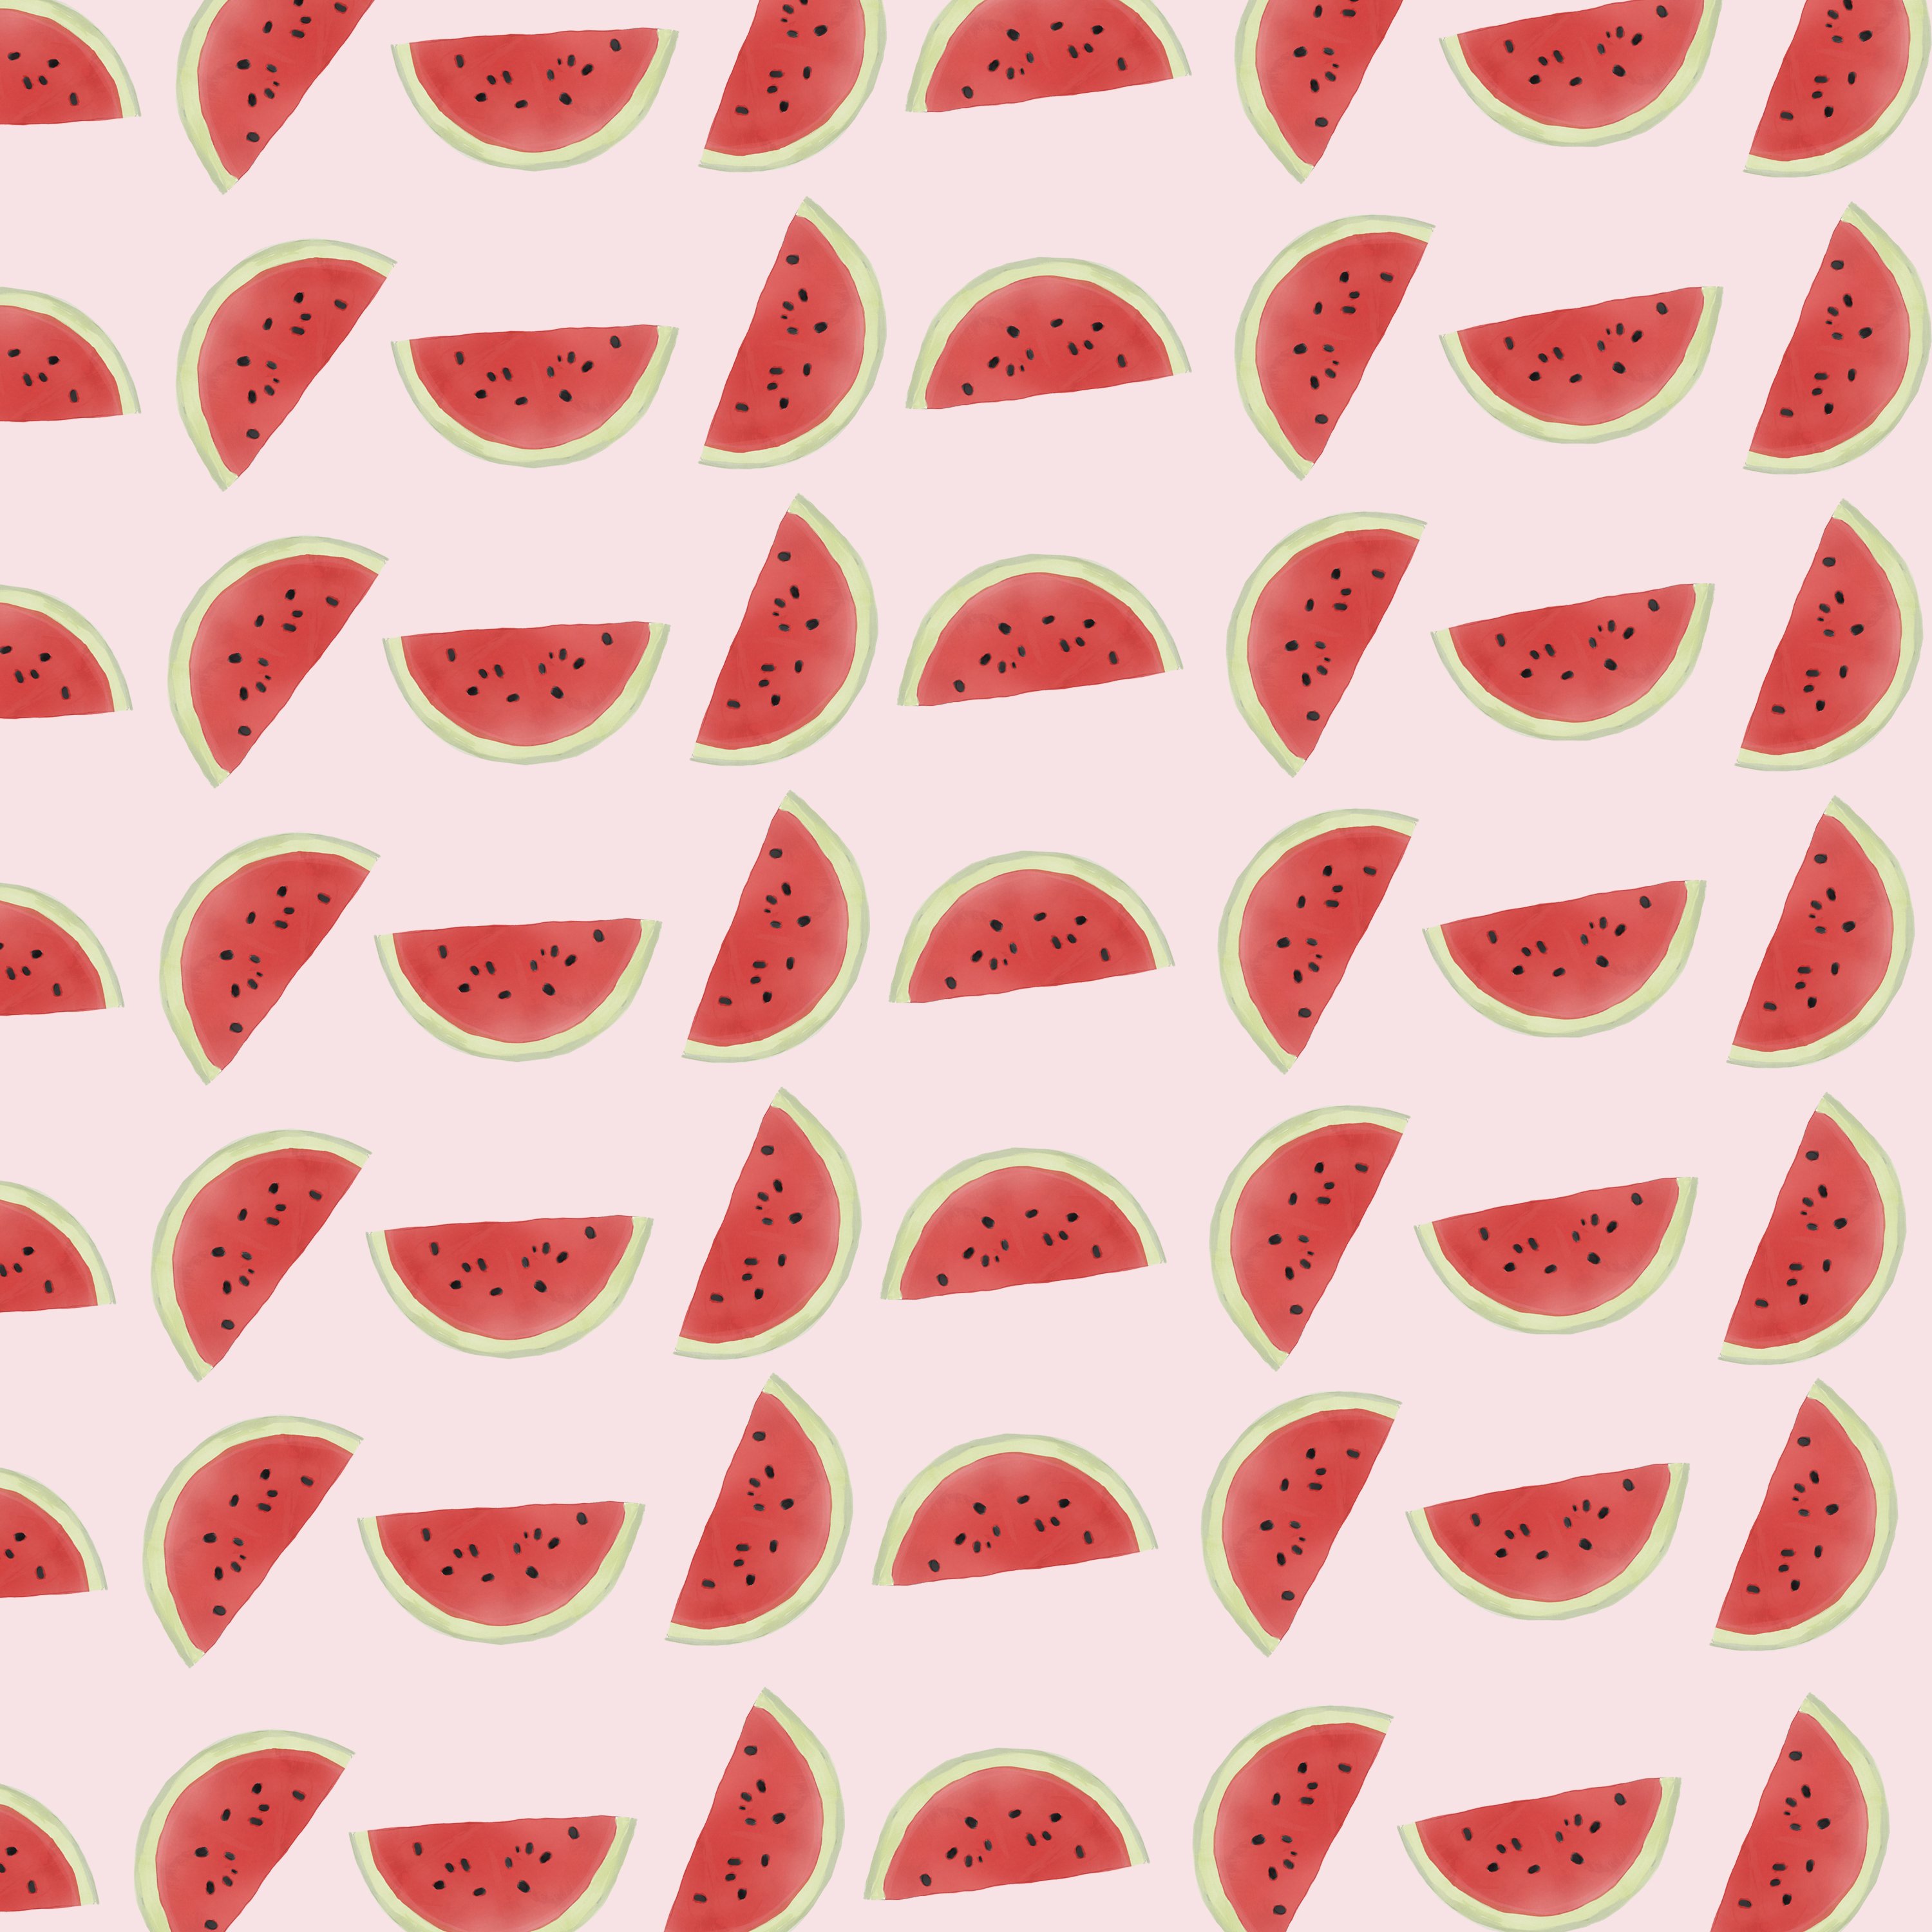 WATERMELON SEAMLESS PATTERN cover image.